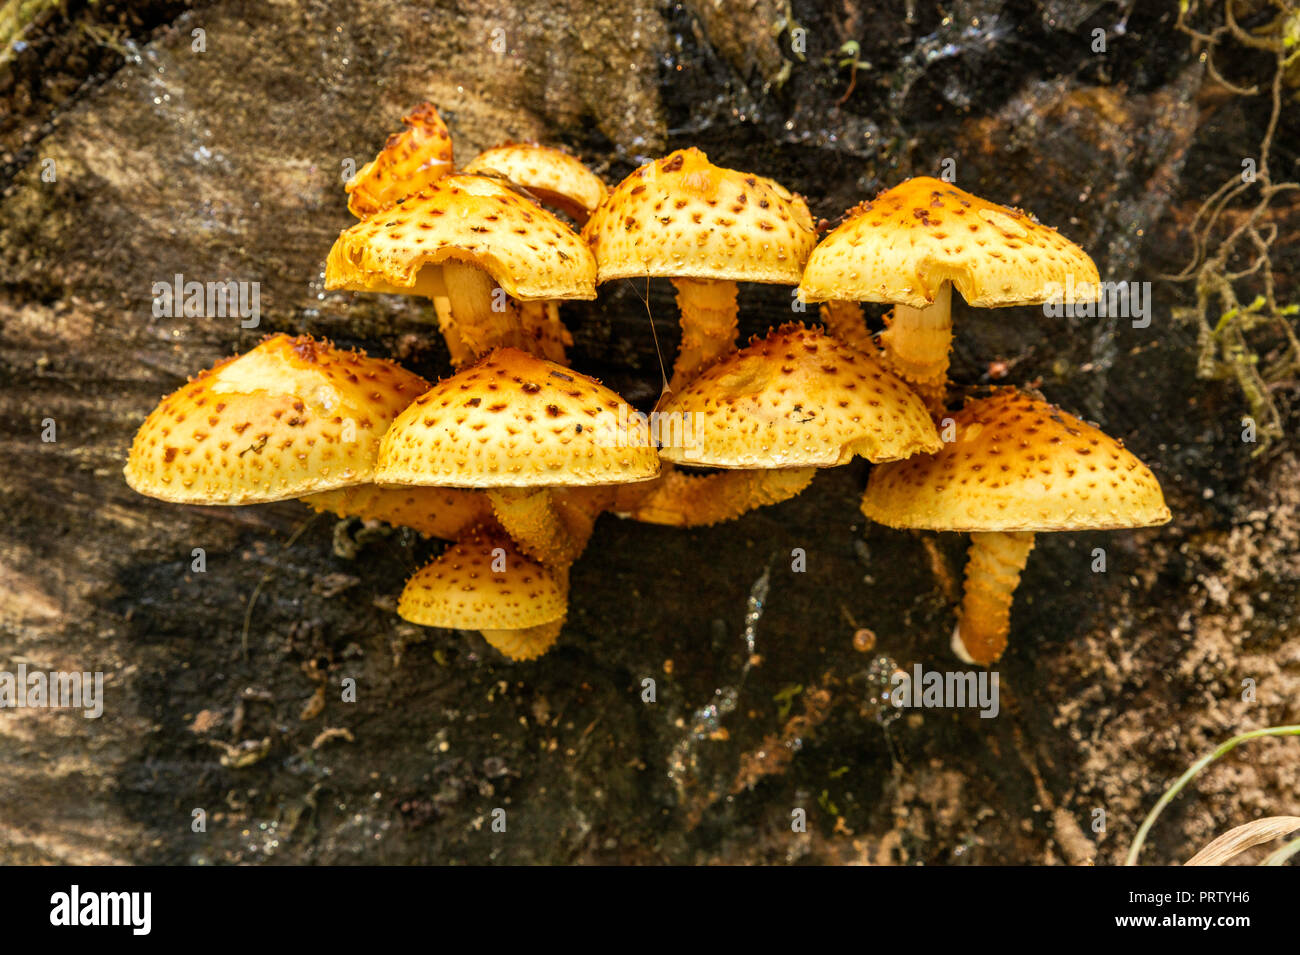 Pholiota jaune, growing on tree stump, le sentier nature, Hoh Rain Forest, Olympic National Park, Washington State, USA Banque D'Images